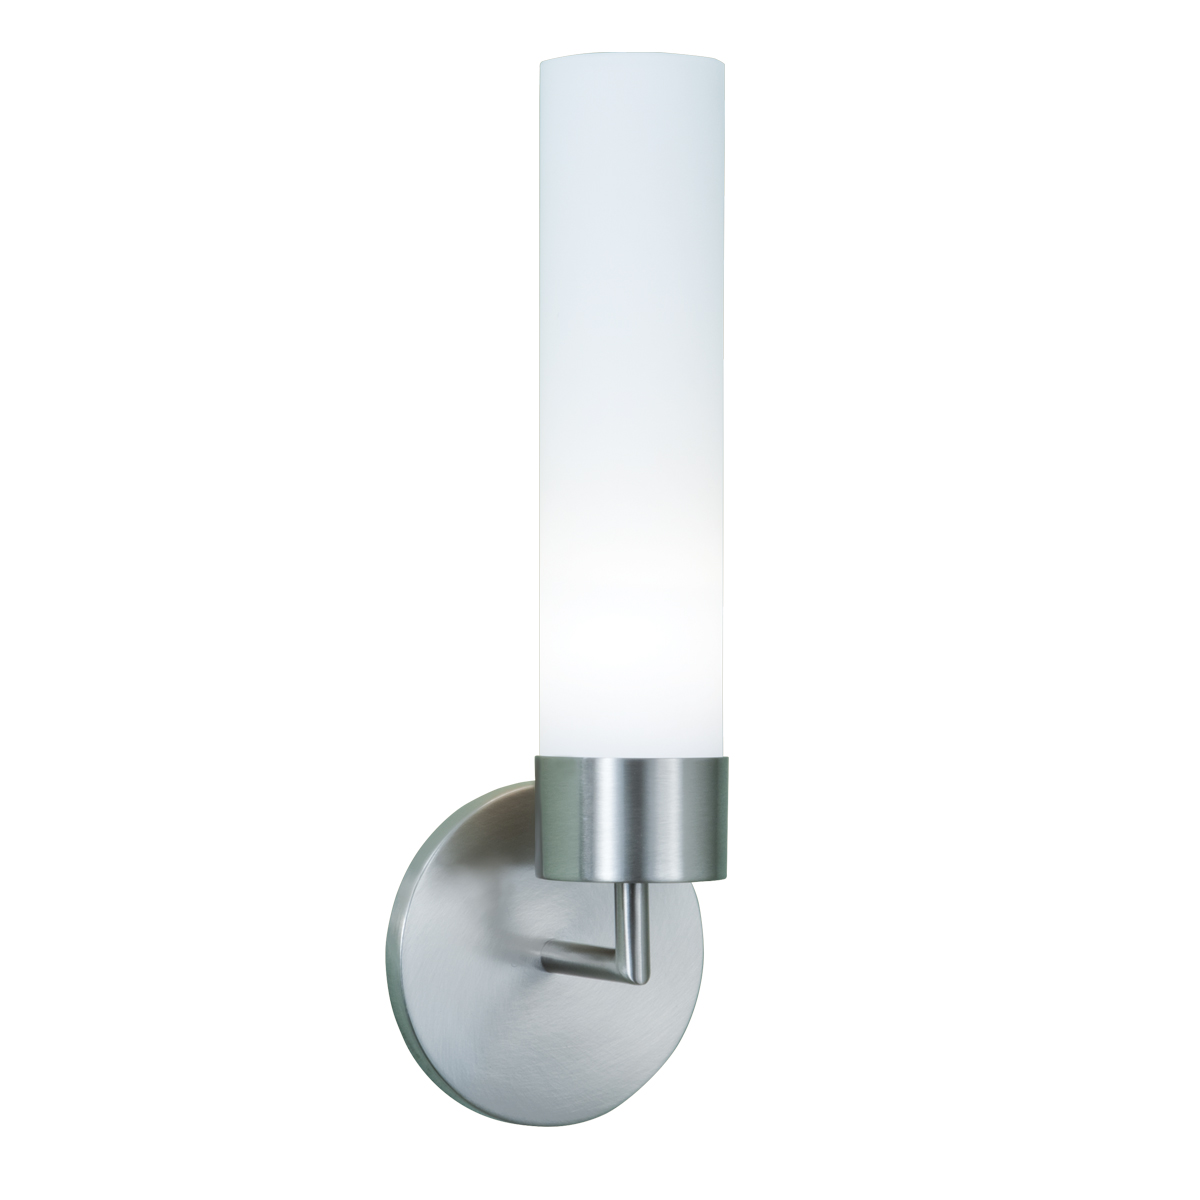 Sobe Vanity Wall Sconce By Norwell, Vanity Wall Sconces